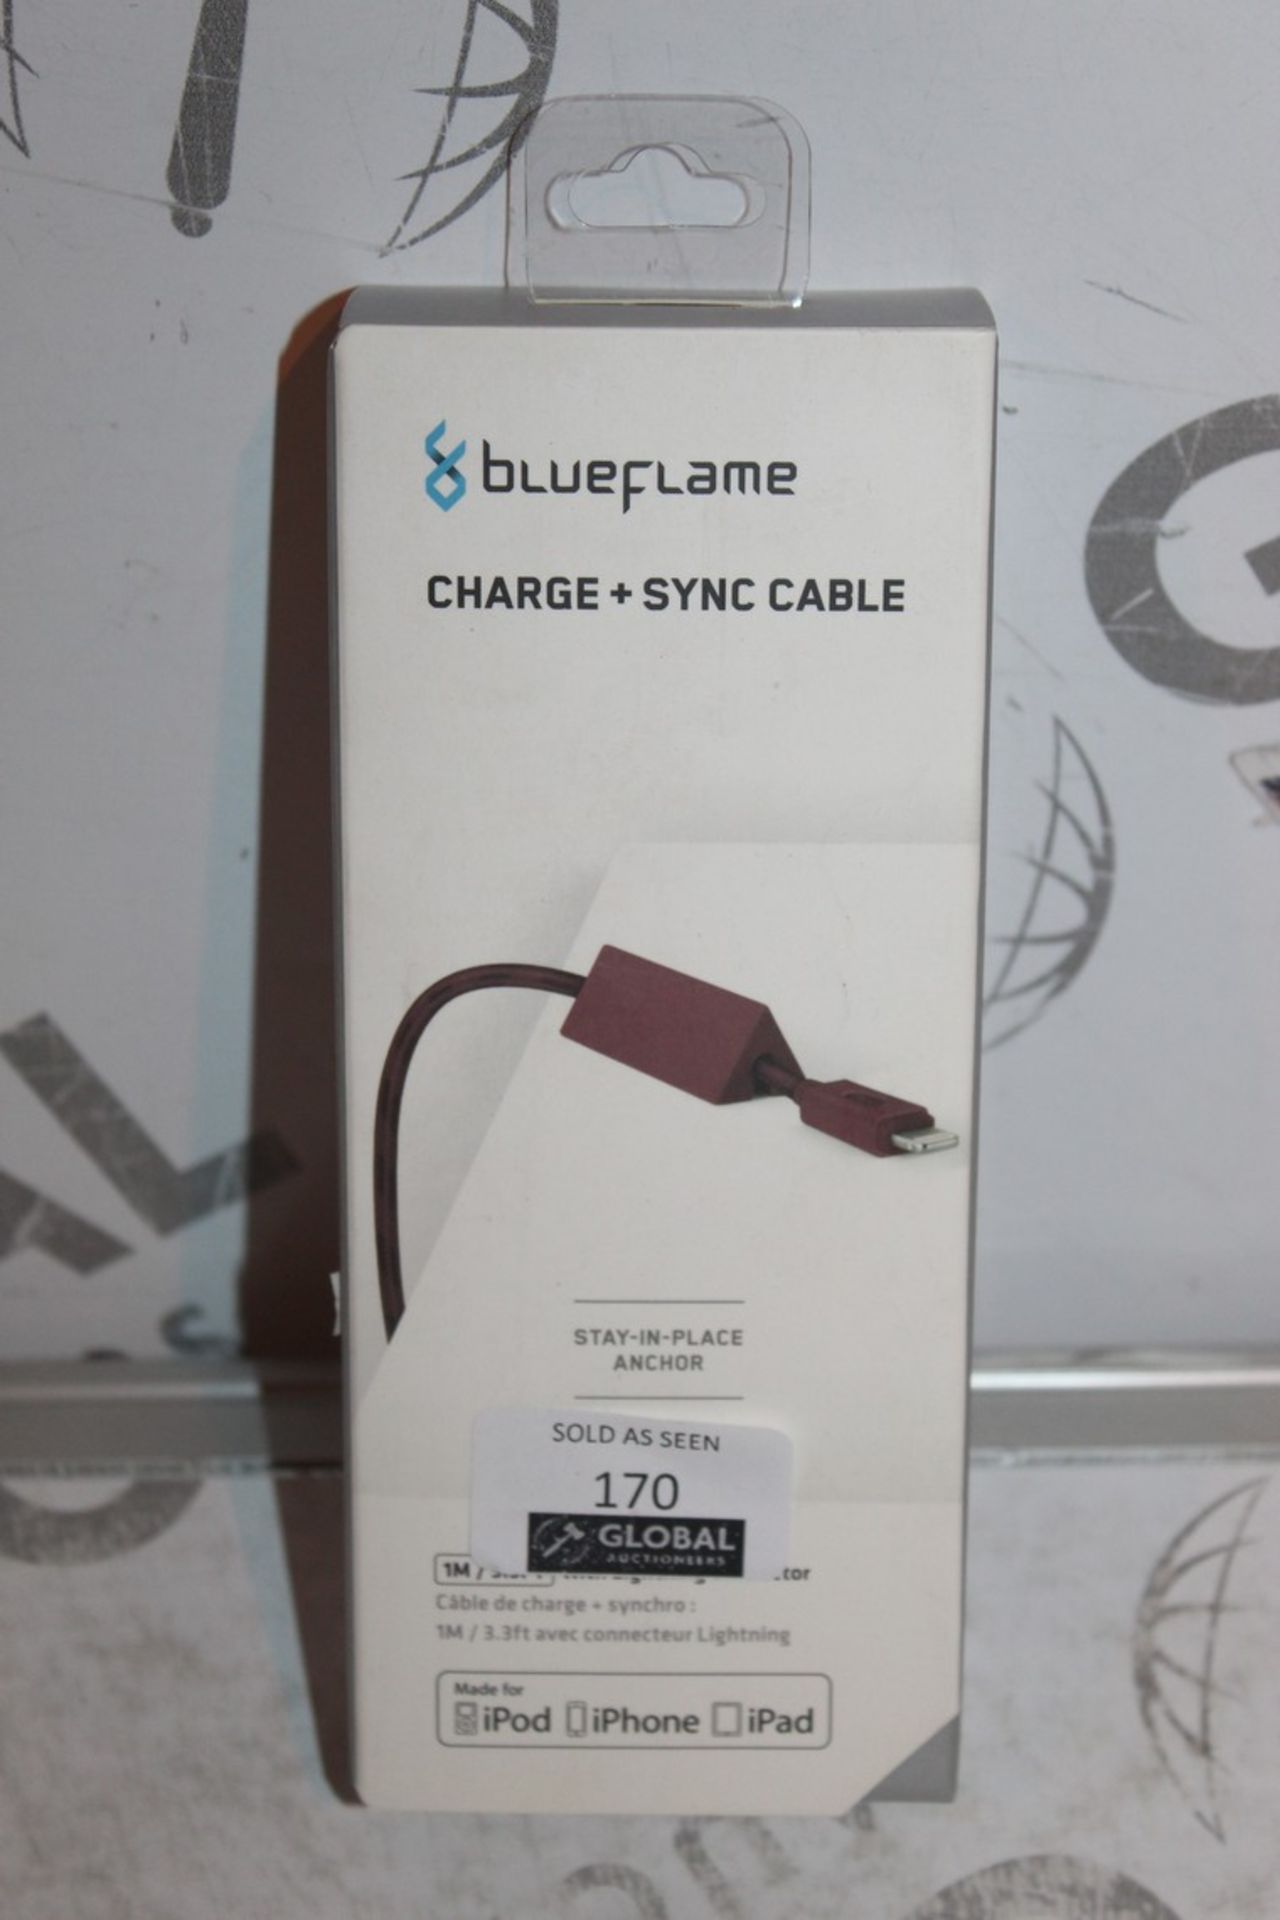 Lot to Contain 5 Brand New Blue Flame Charge and Sync Cables with Anchor Combined RRP £100